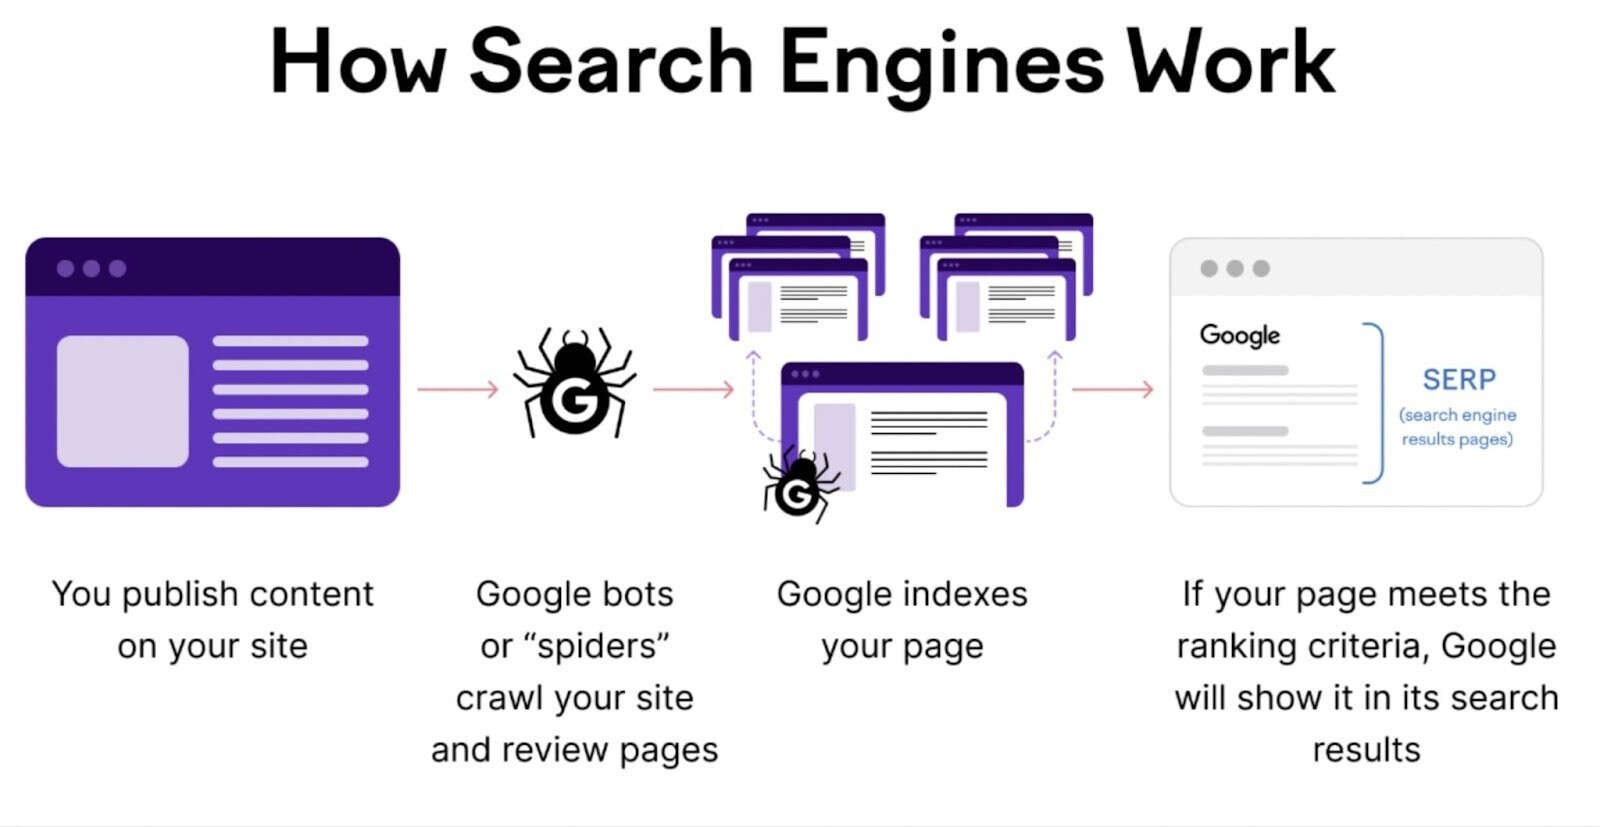 "How Search Engines Work" infographic